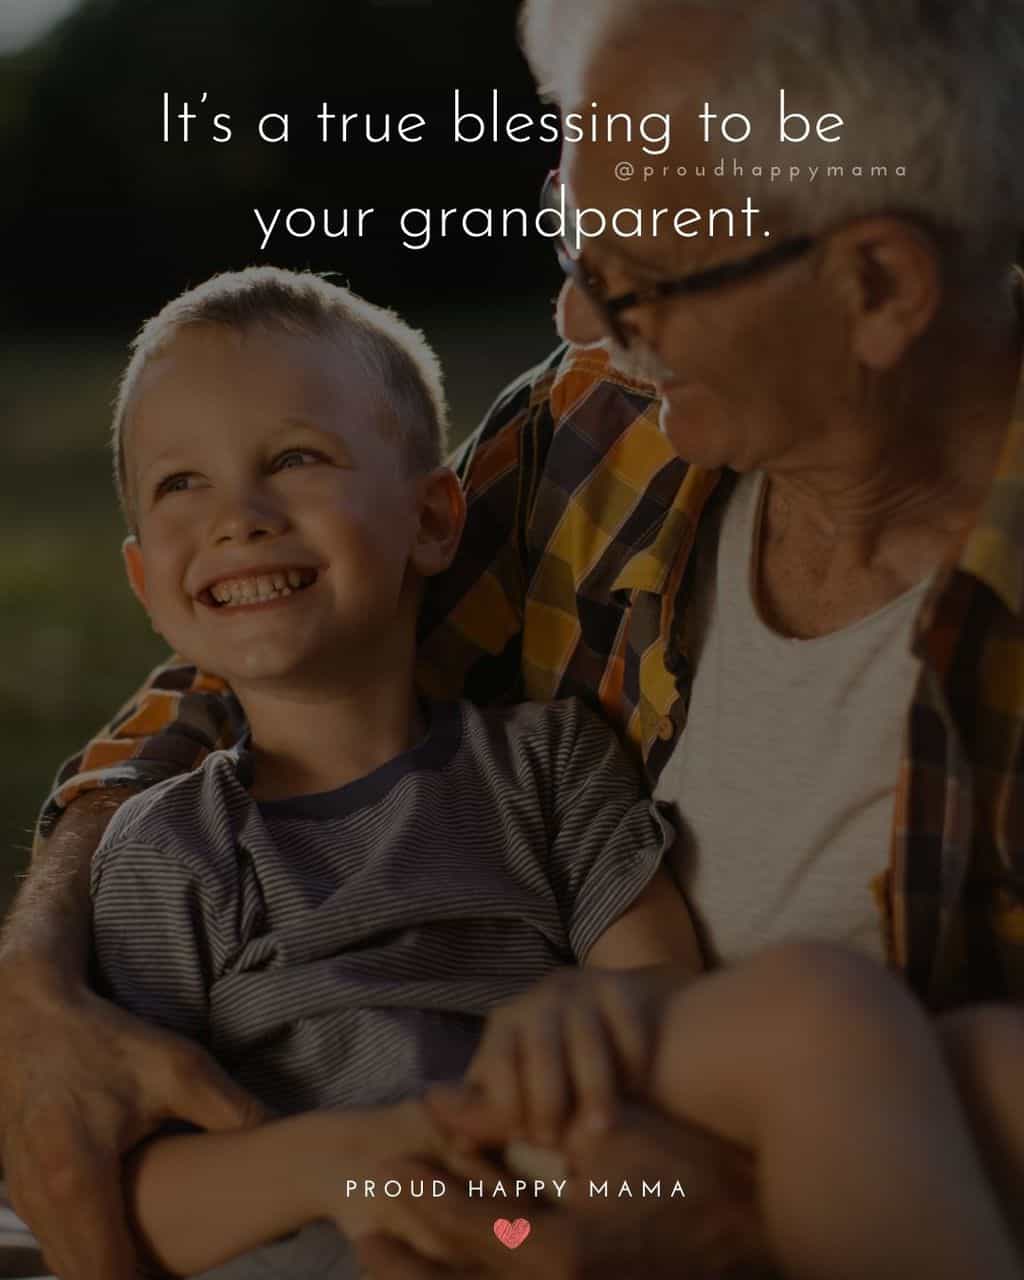 Grandparent Quotes – It’s a true blessing to be your grandparent.’